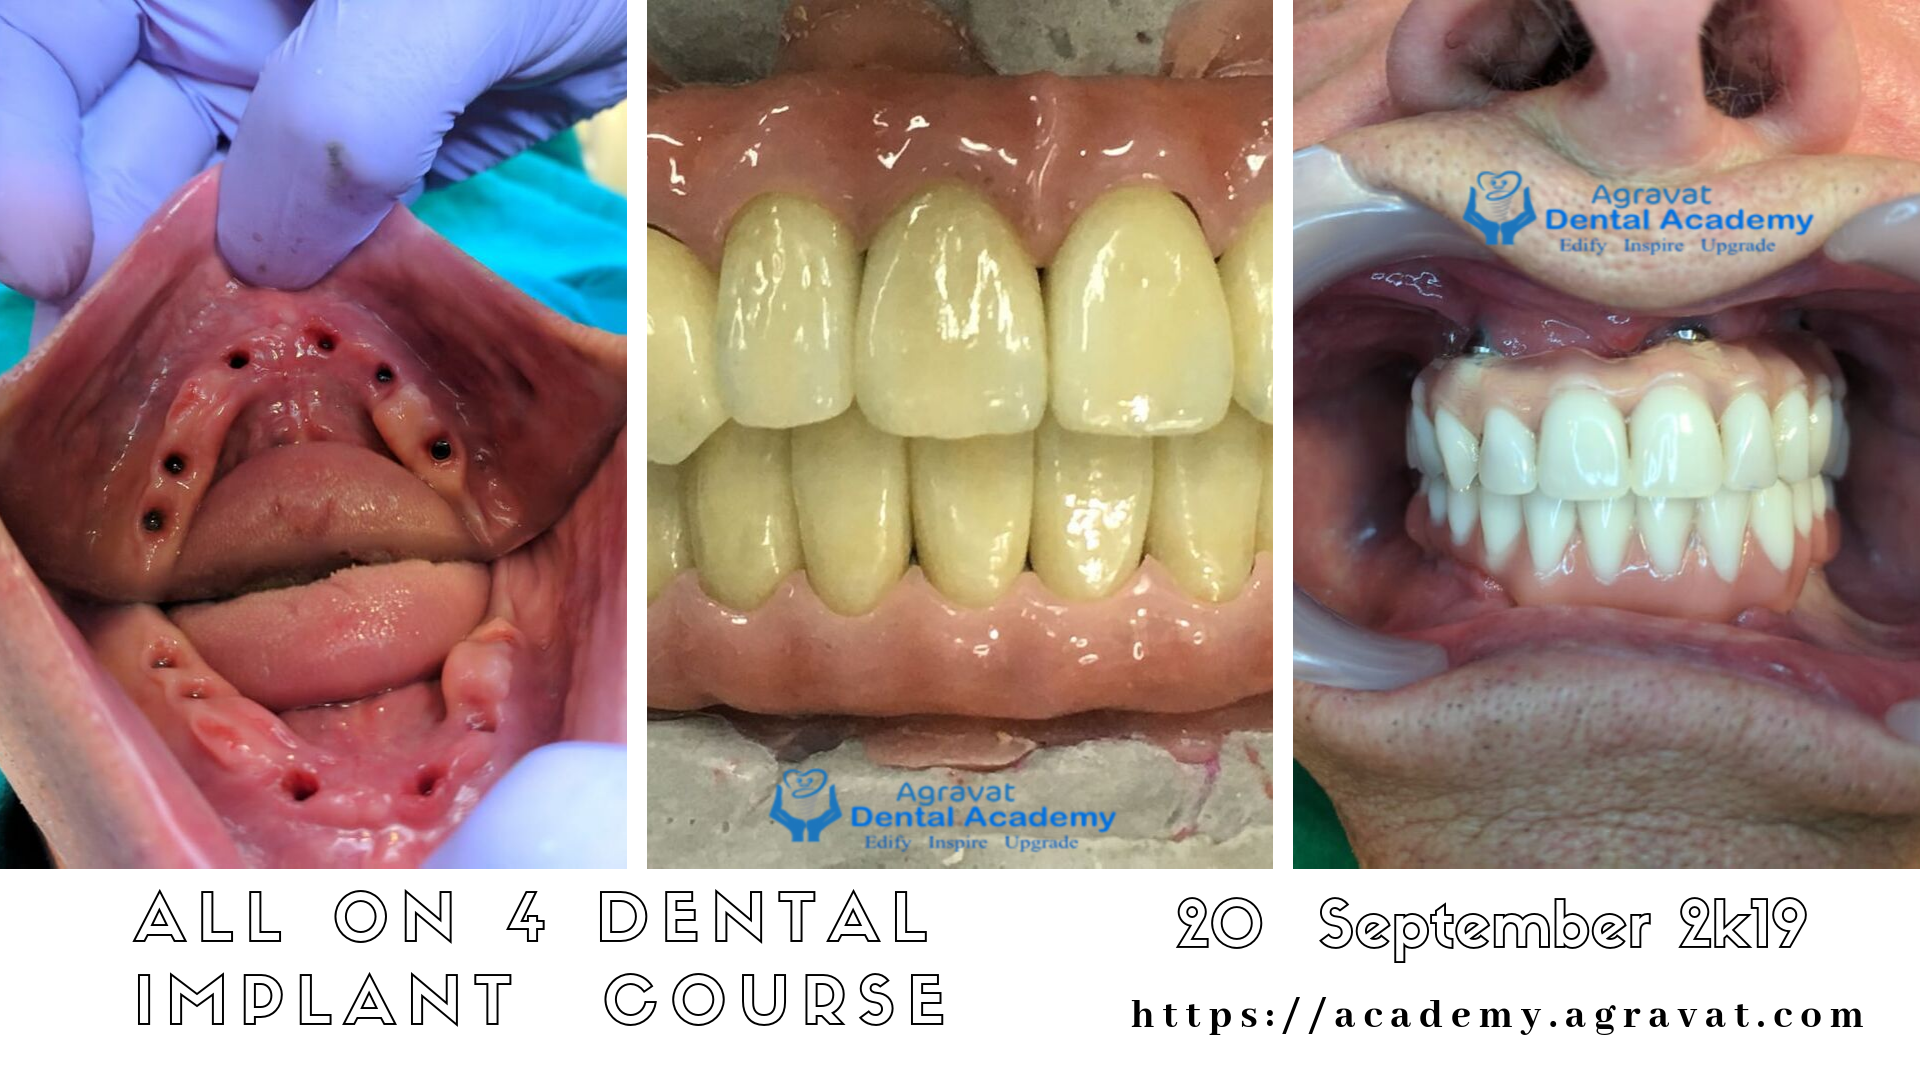 All on 4/6 Dental Implant Training Course, Hands On, Live Surgery in Ahmedabad Gujarat India, Ahmedabad, Gujarat, India